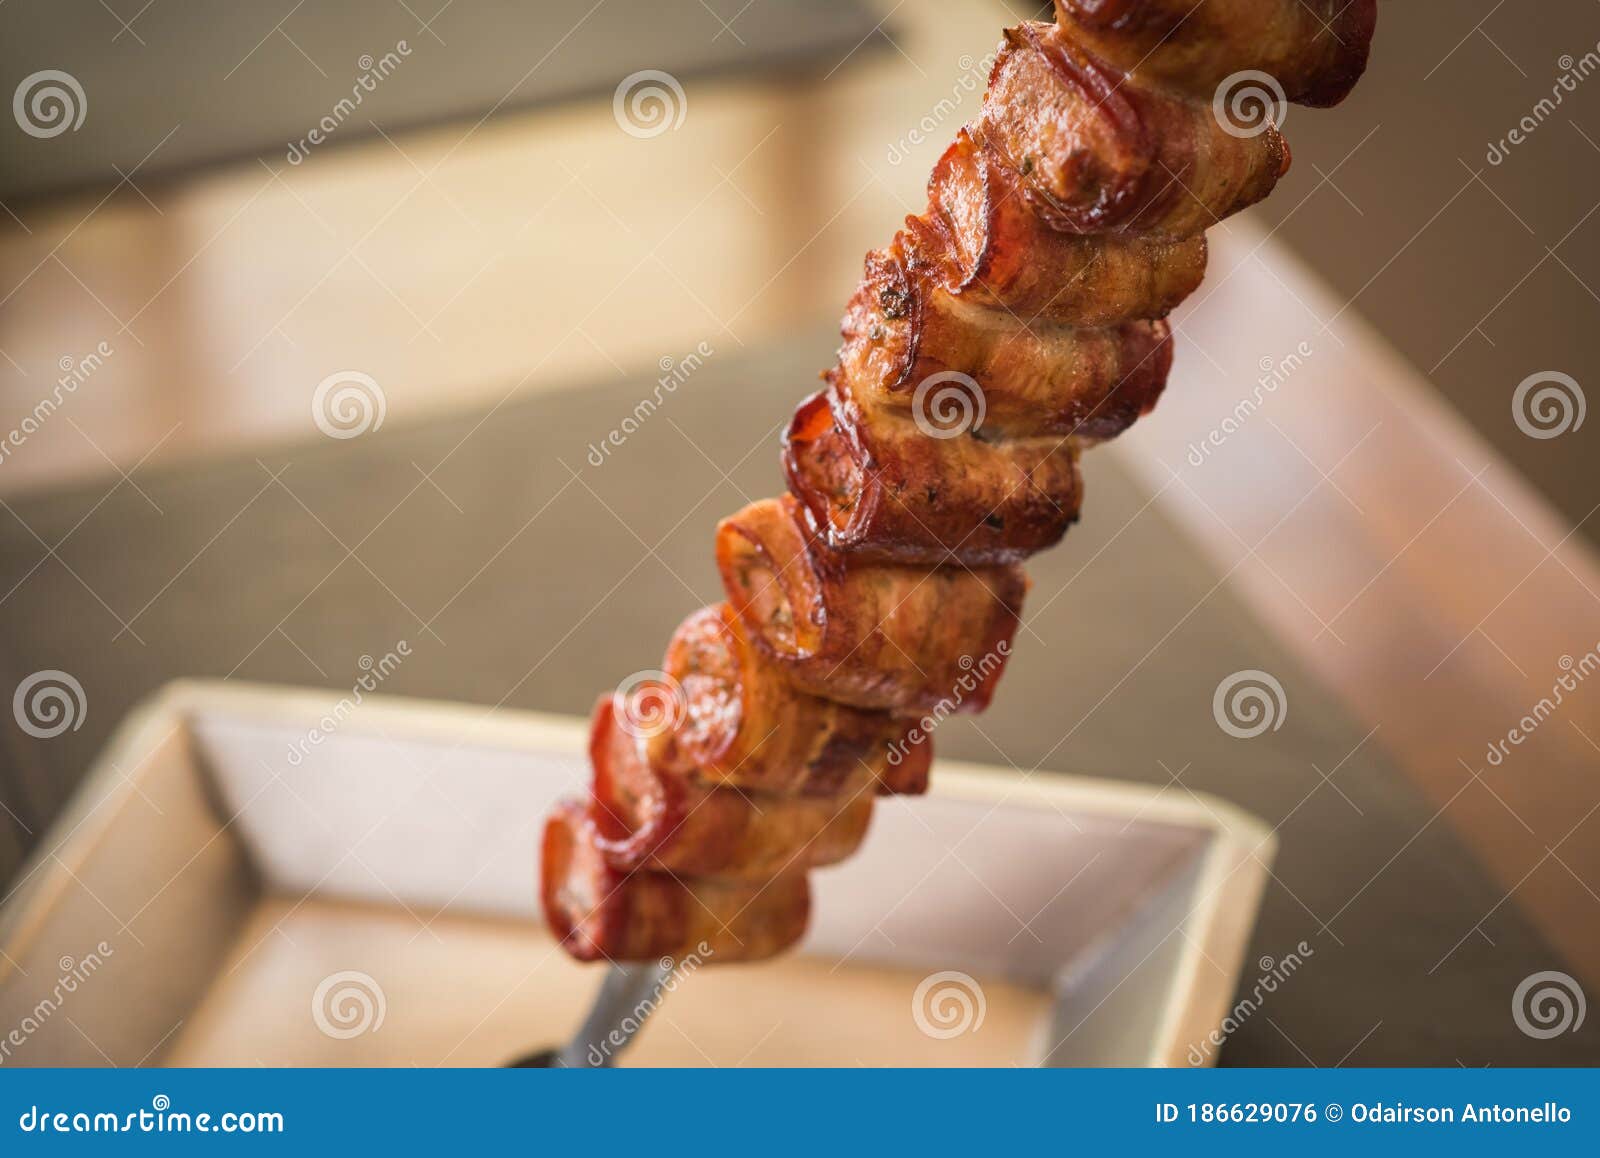 medallion, pork rolled in bacon served in churrascaria